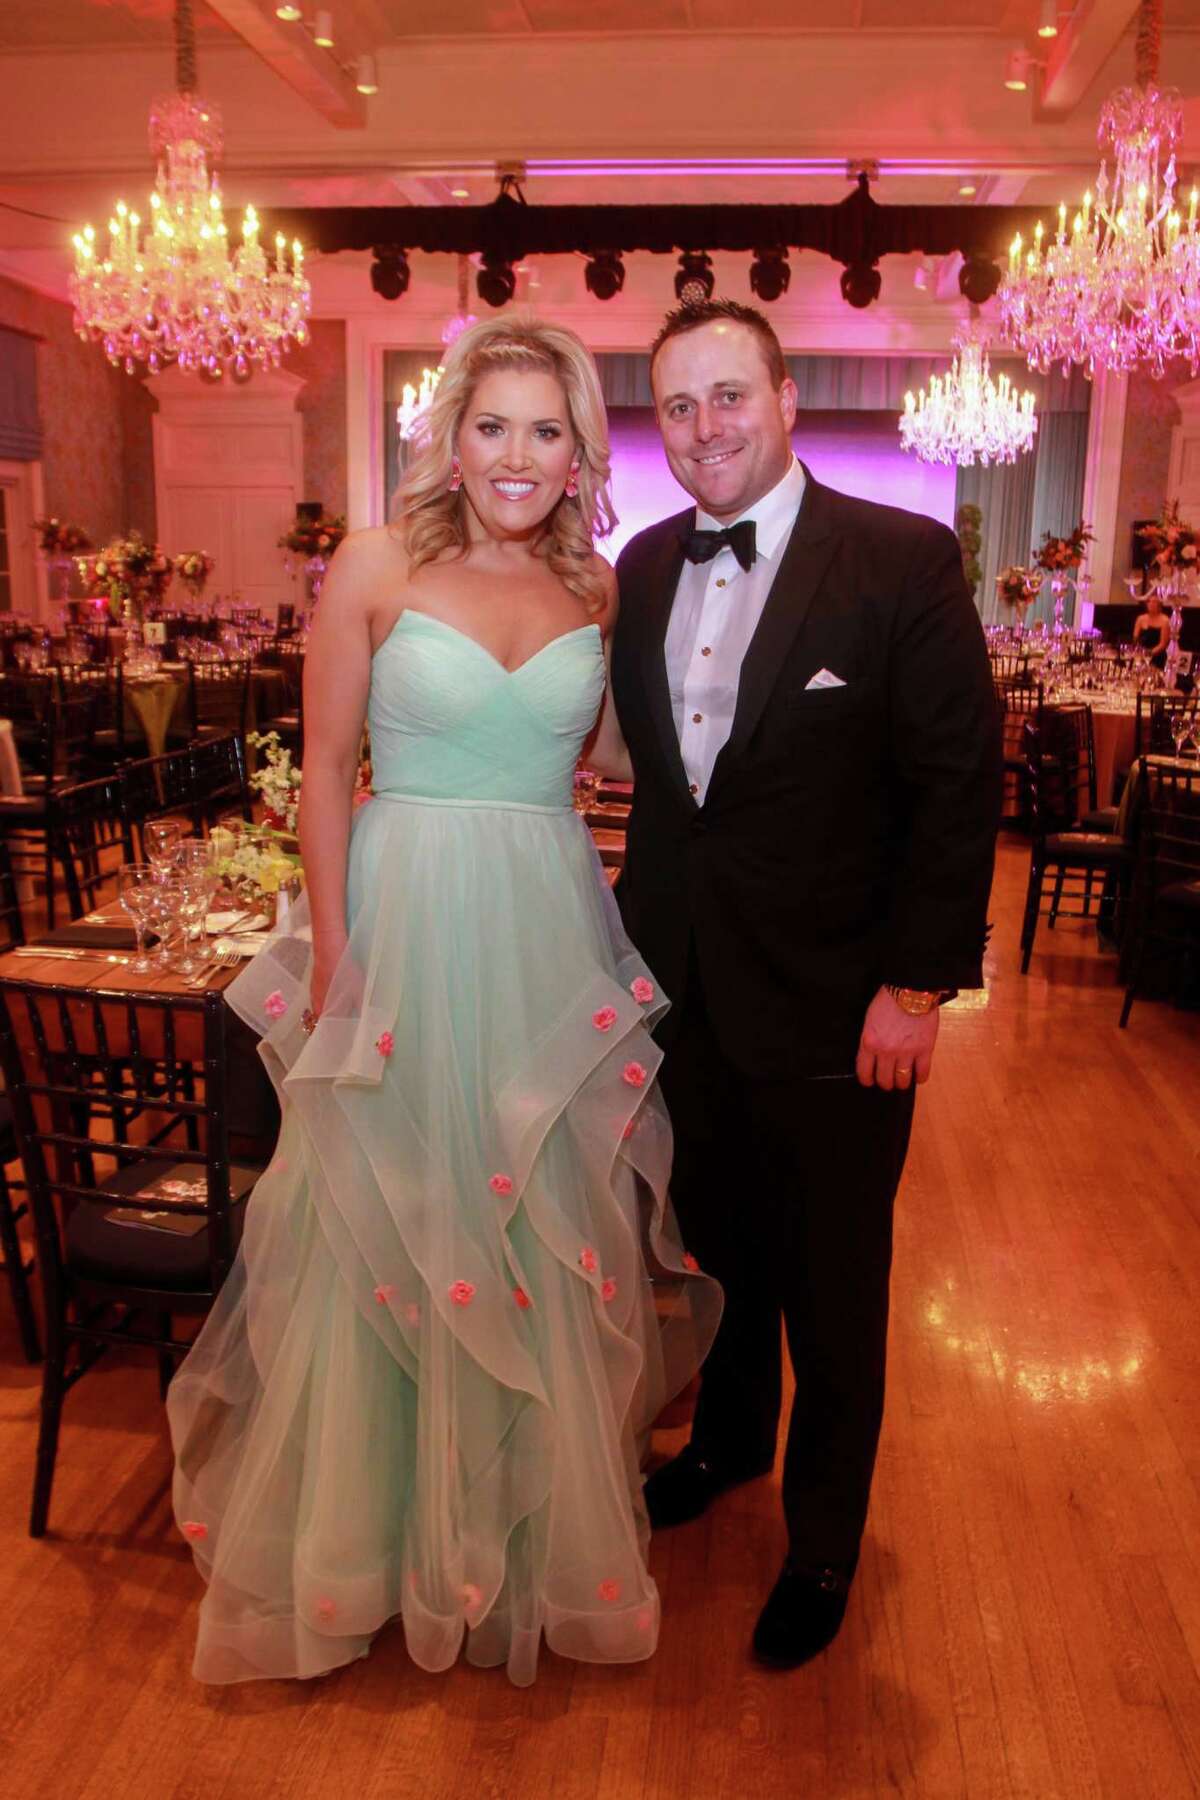 Amanda and Terry Boffone at Junior League's 72nd annual Charity Ball at Junior League of Houston on February 7, 2020.